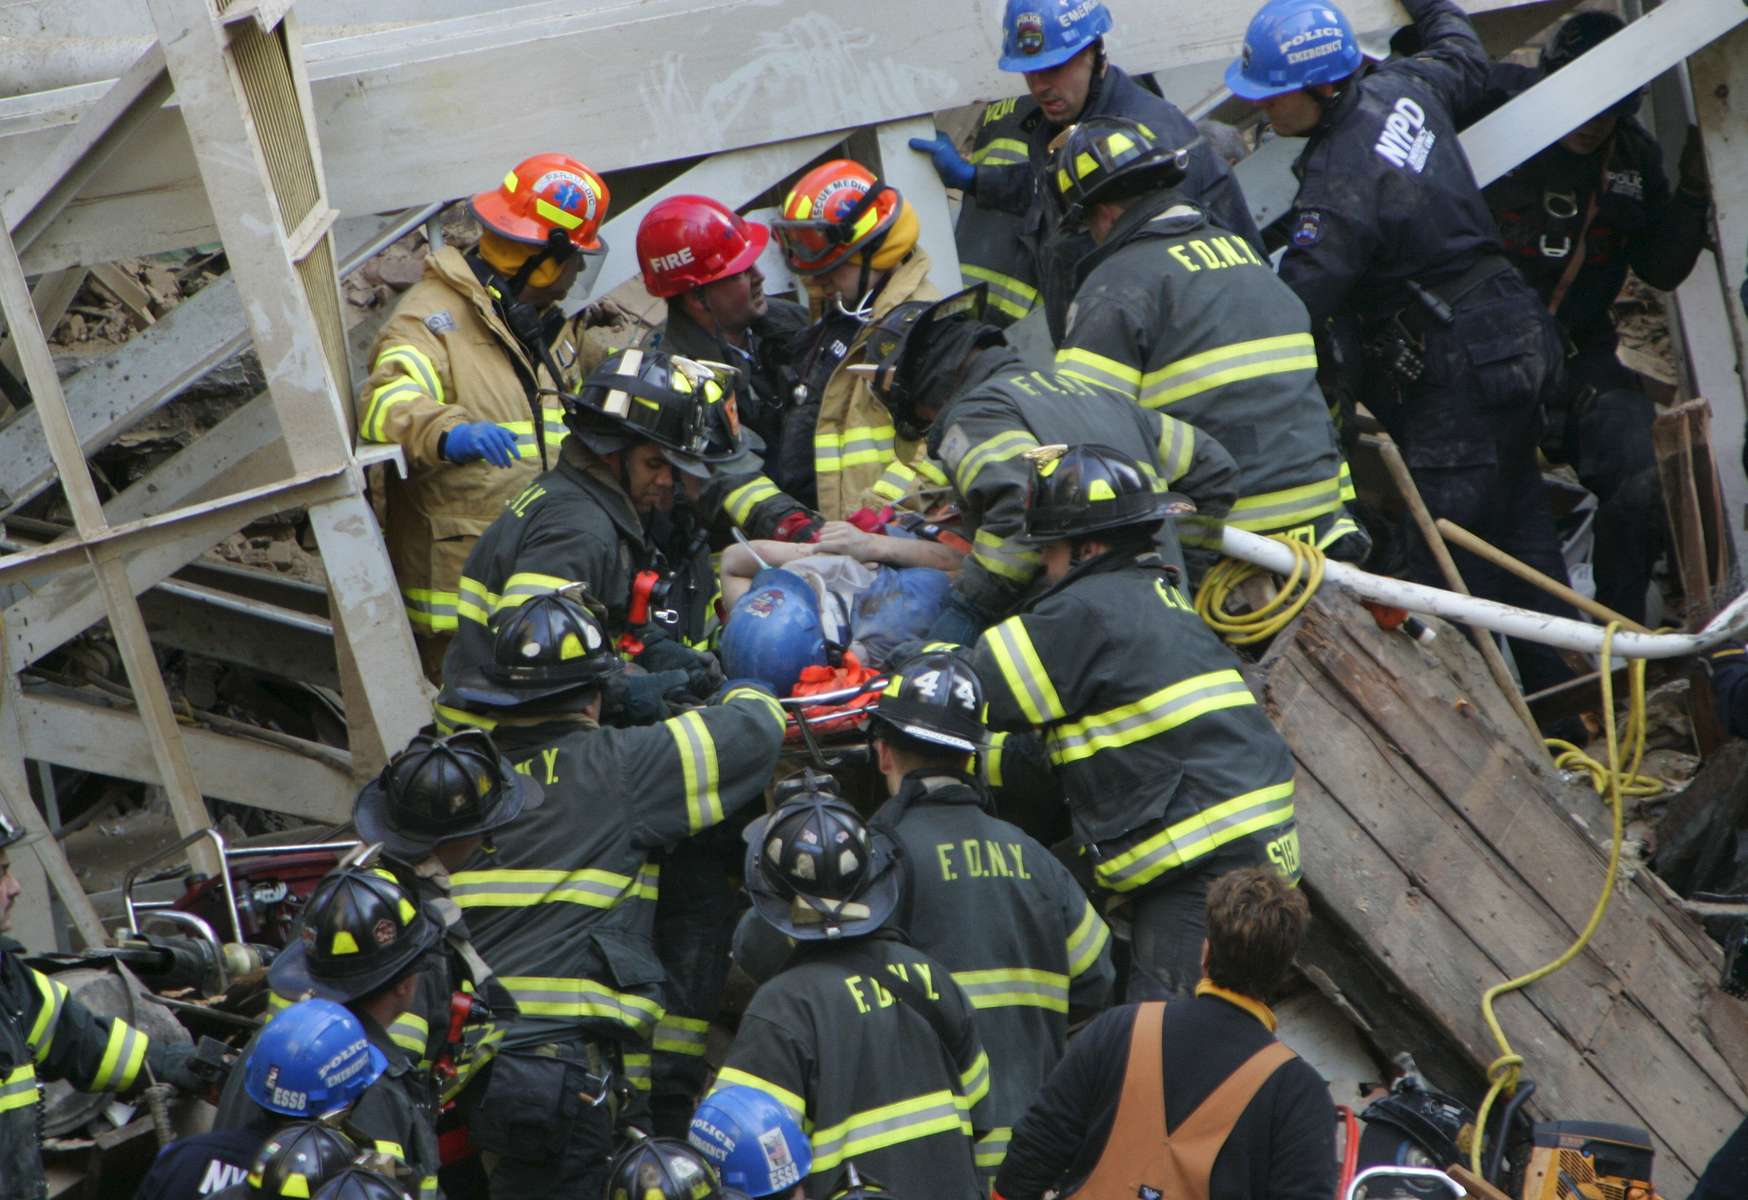 Firefighters rescue a survivor buried in the rubble after a crane collapse on a building located at 51st and 2nd Ave in Manhattan on March 15, 2008.